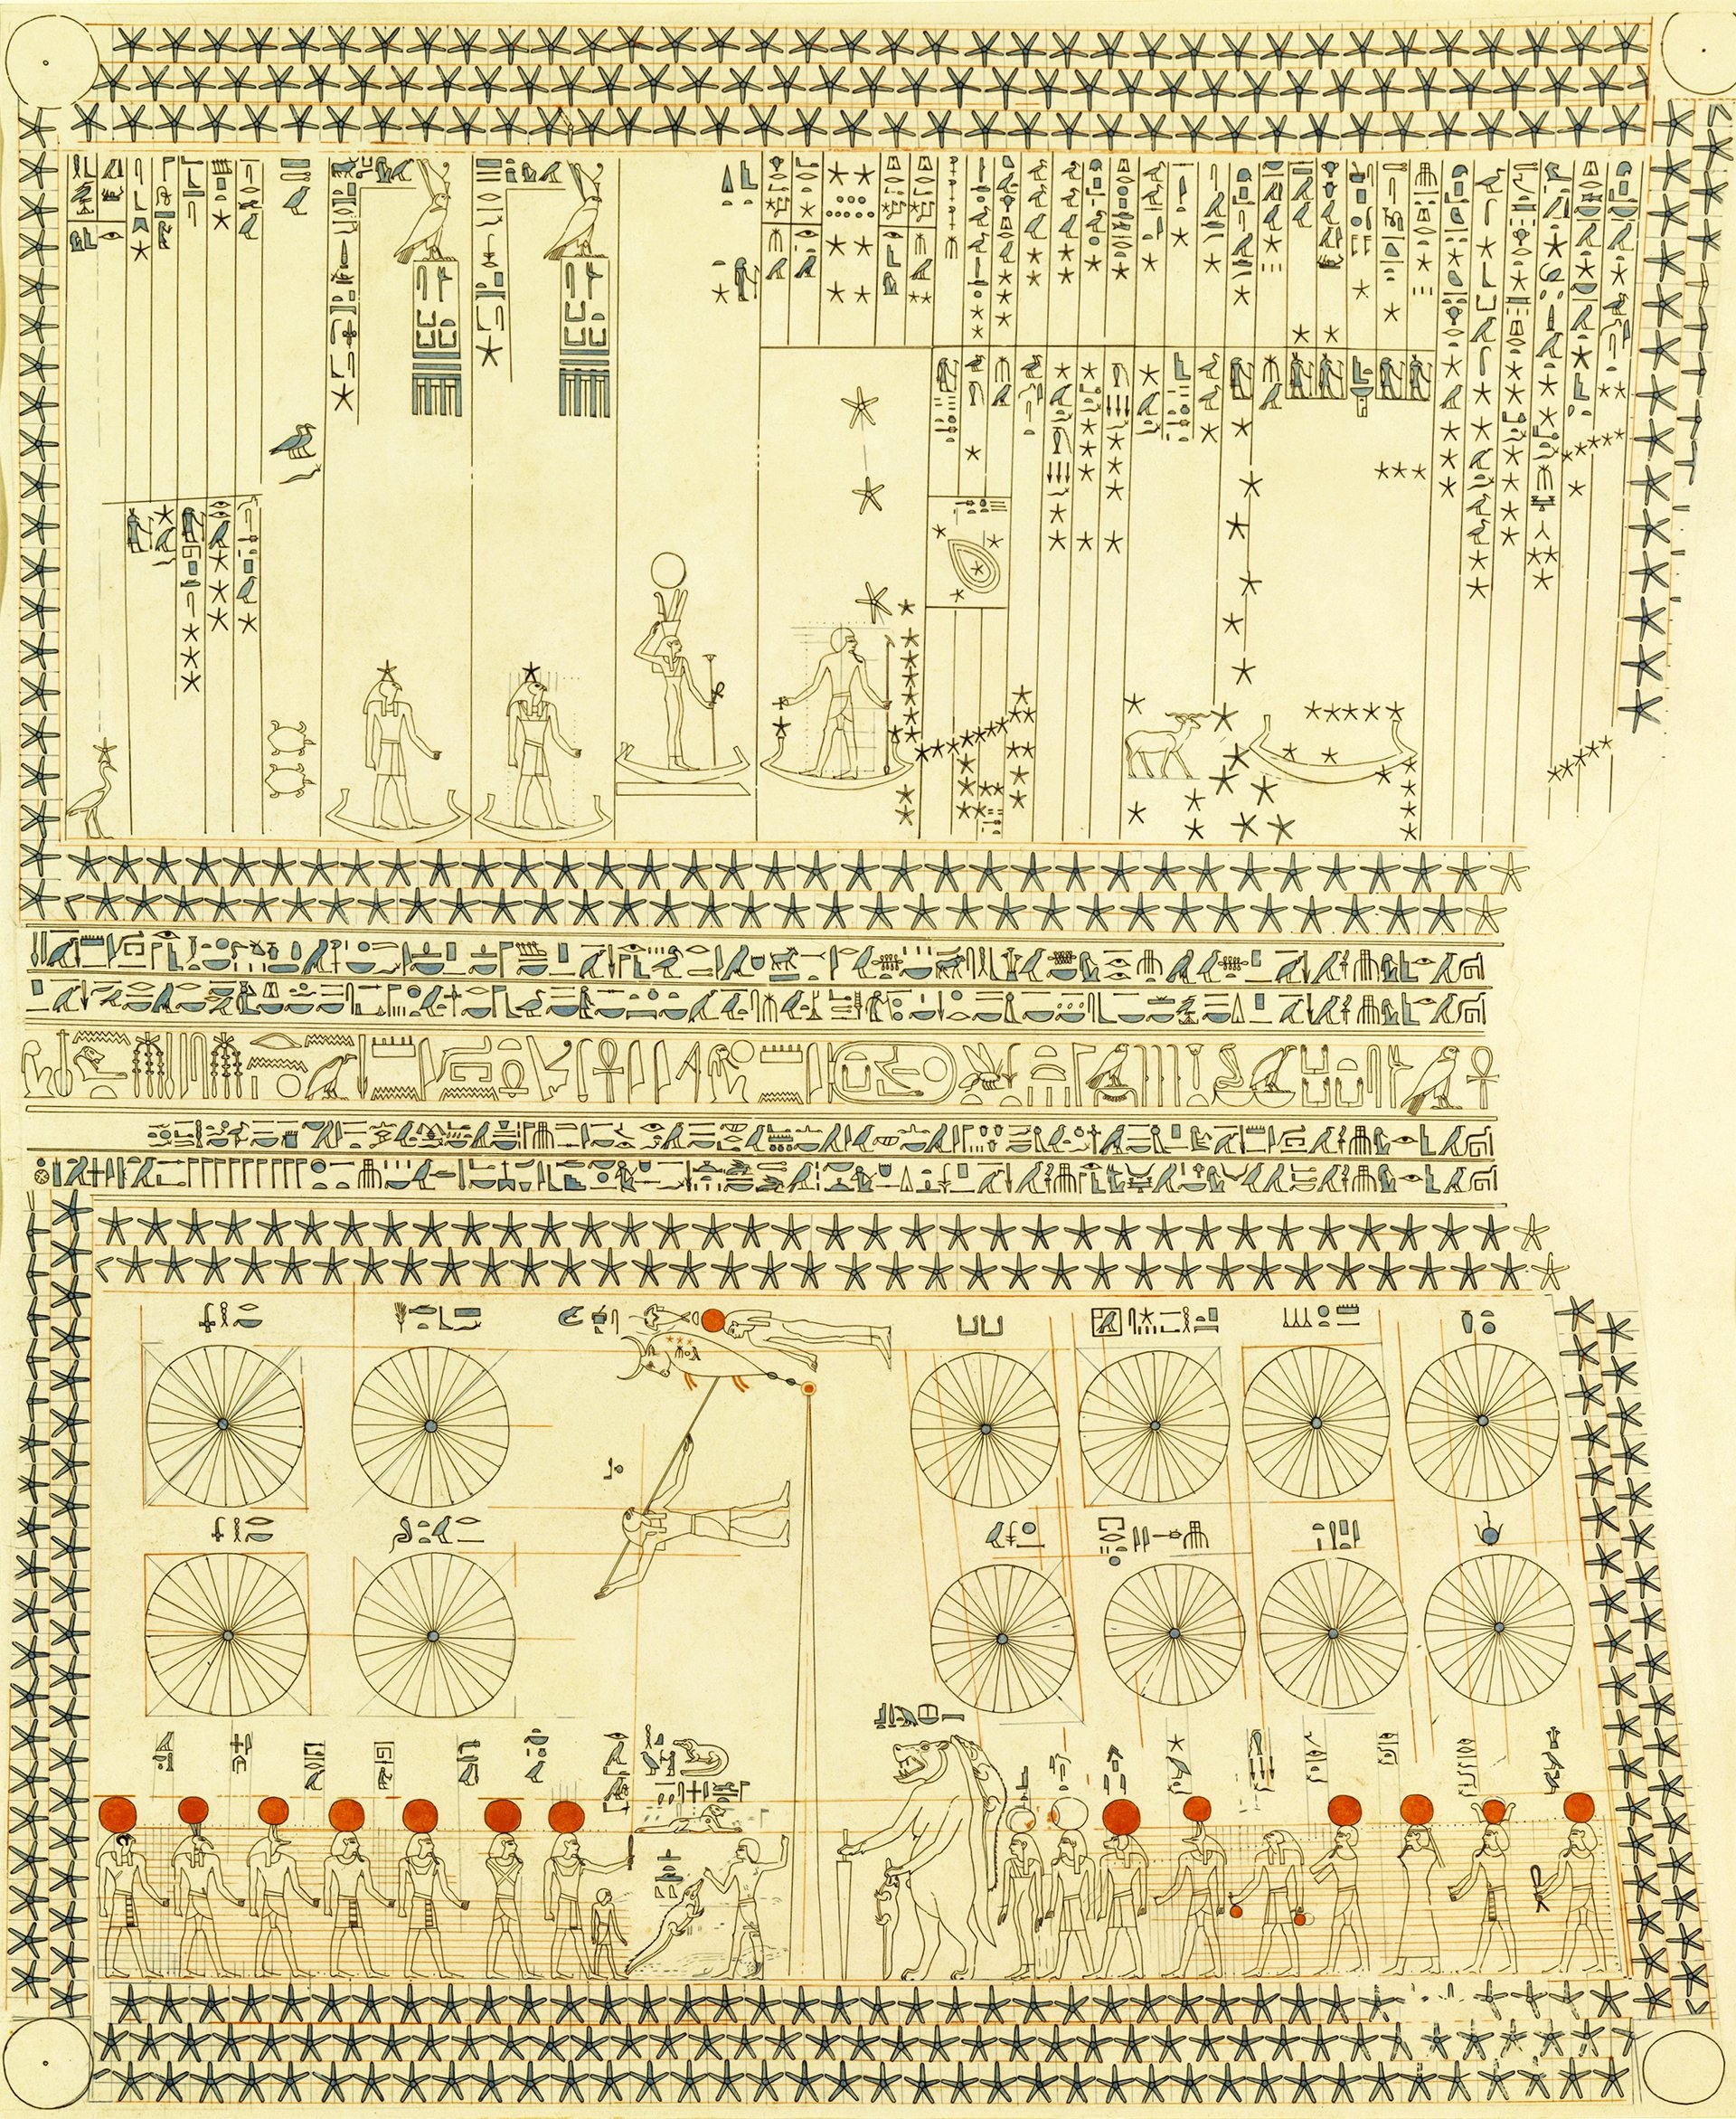 Ancient Egyptian astronomical illustration from the tomb of Senenmut (TT 353) at Deir el-Bahri, showcasing a detailed guide to the night sky. It features constellation or deity figures, columns of text referencing known planets and decan stars, and twelve circles at the bottom divided into segments representing hours, labeled with the months of the year.